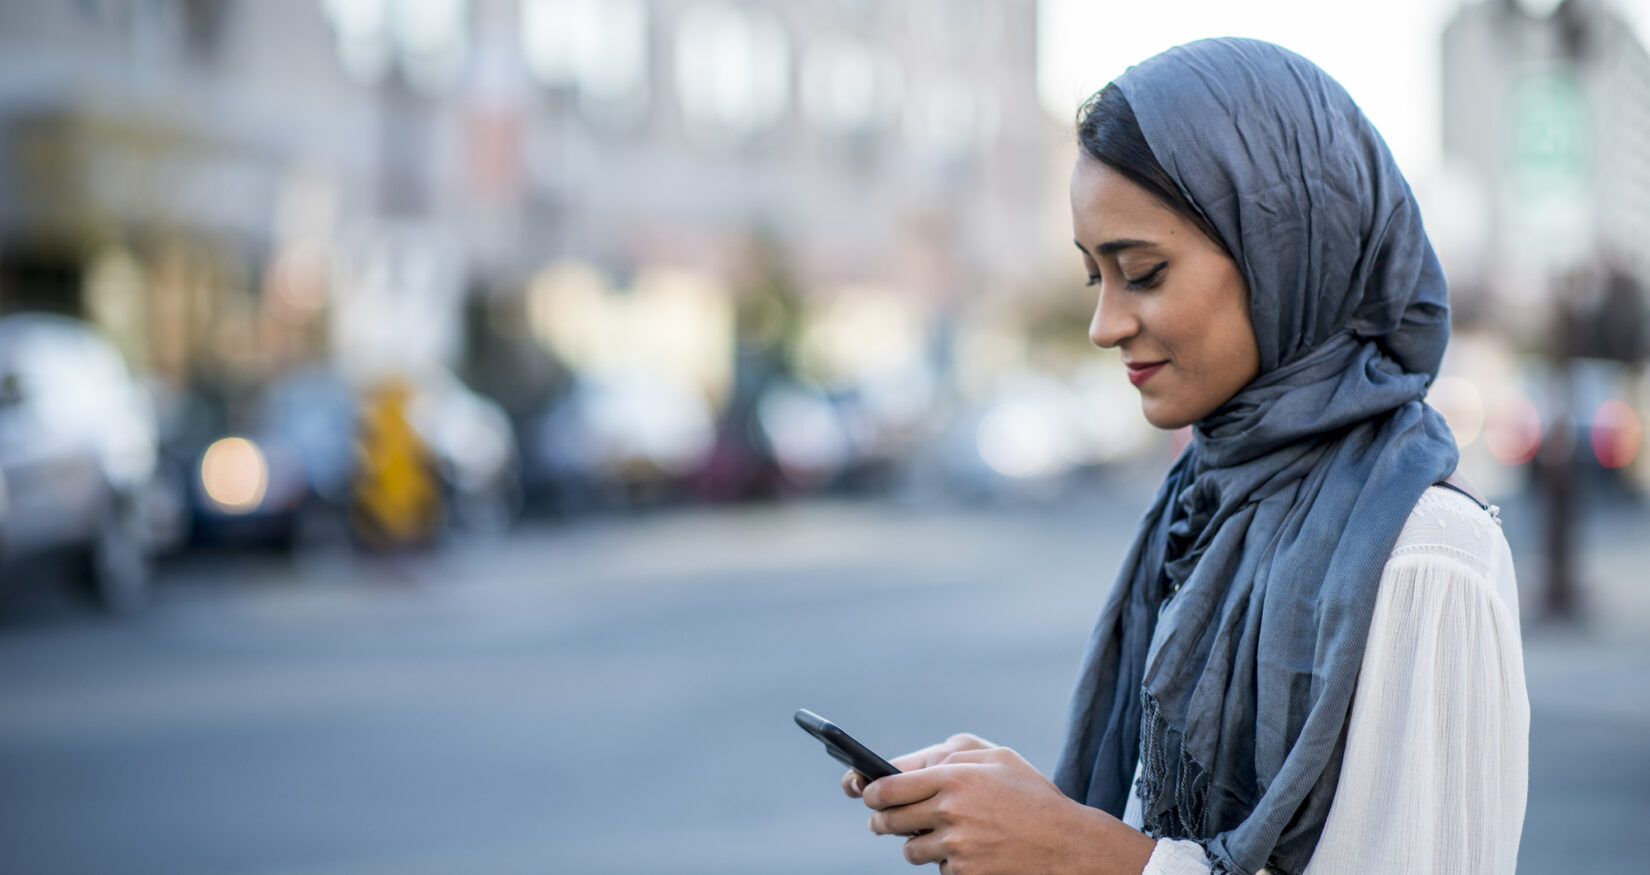 woman in headscarf on mobile phone